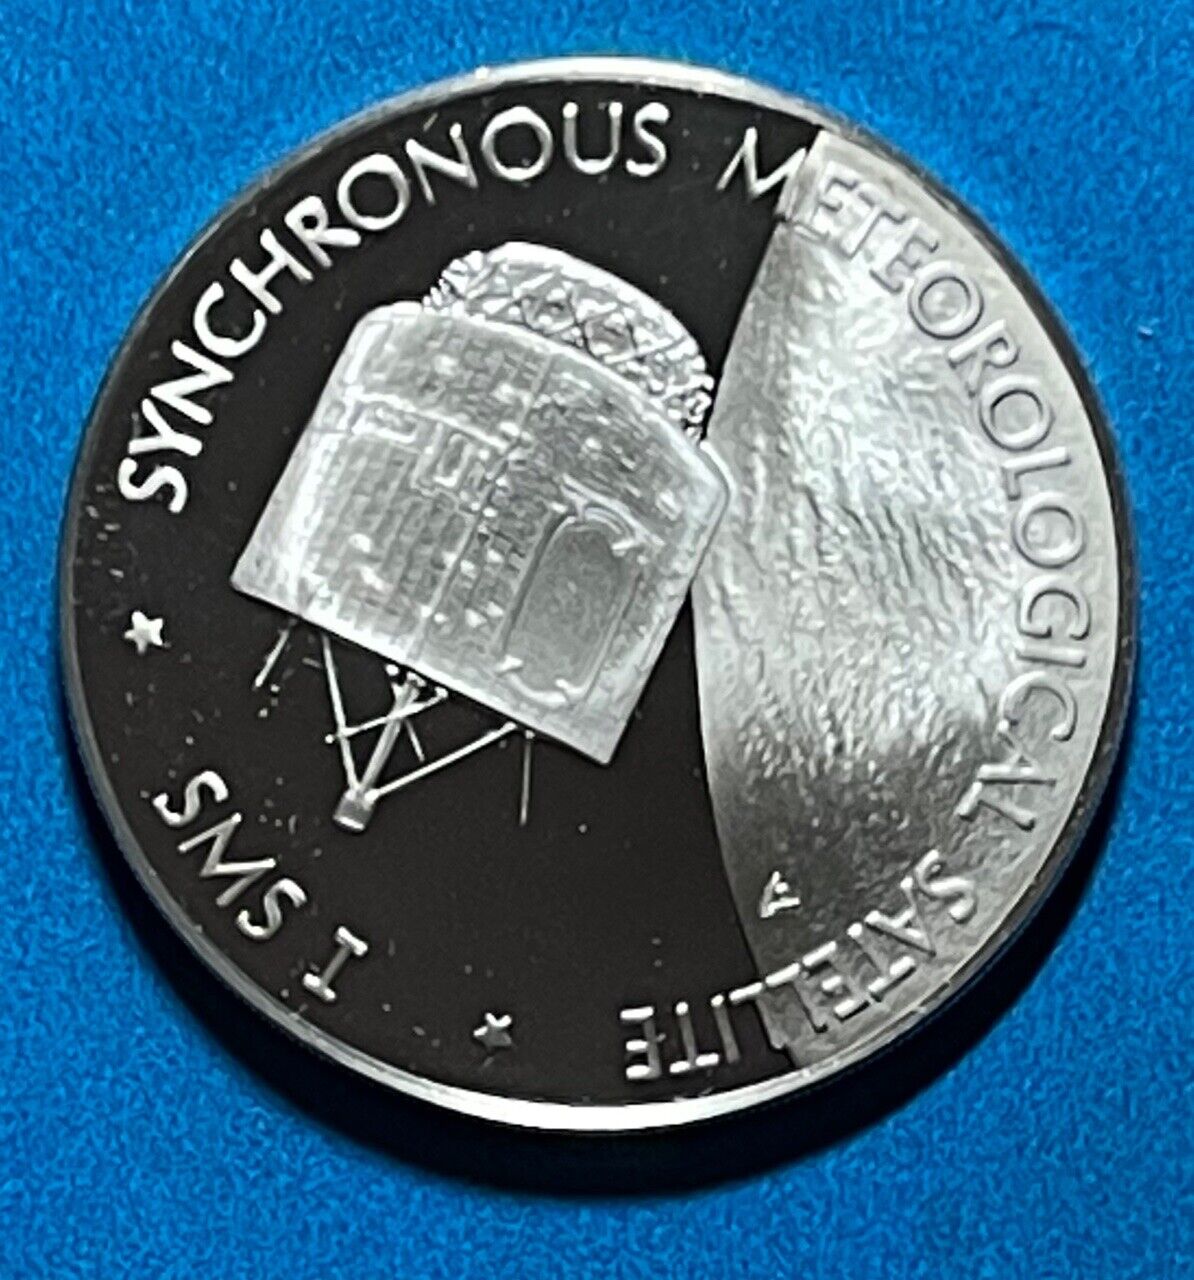 SMS 1  FLIGHTS SERIES PROOF AMERICA IN SPACE STERLING SILVER MEDAL / COIN